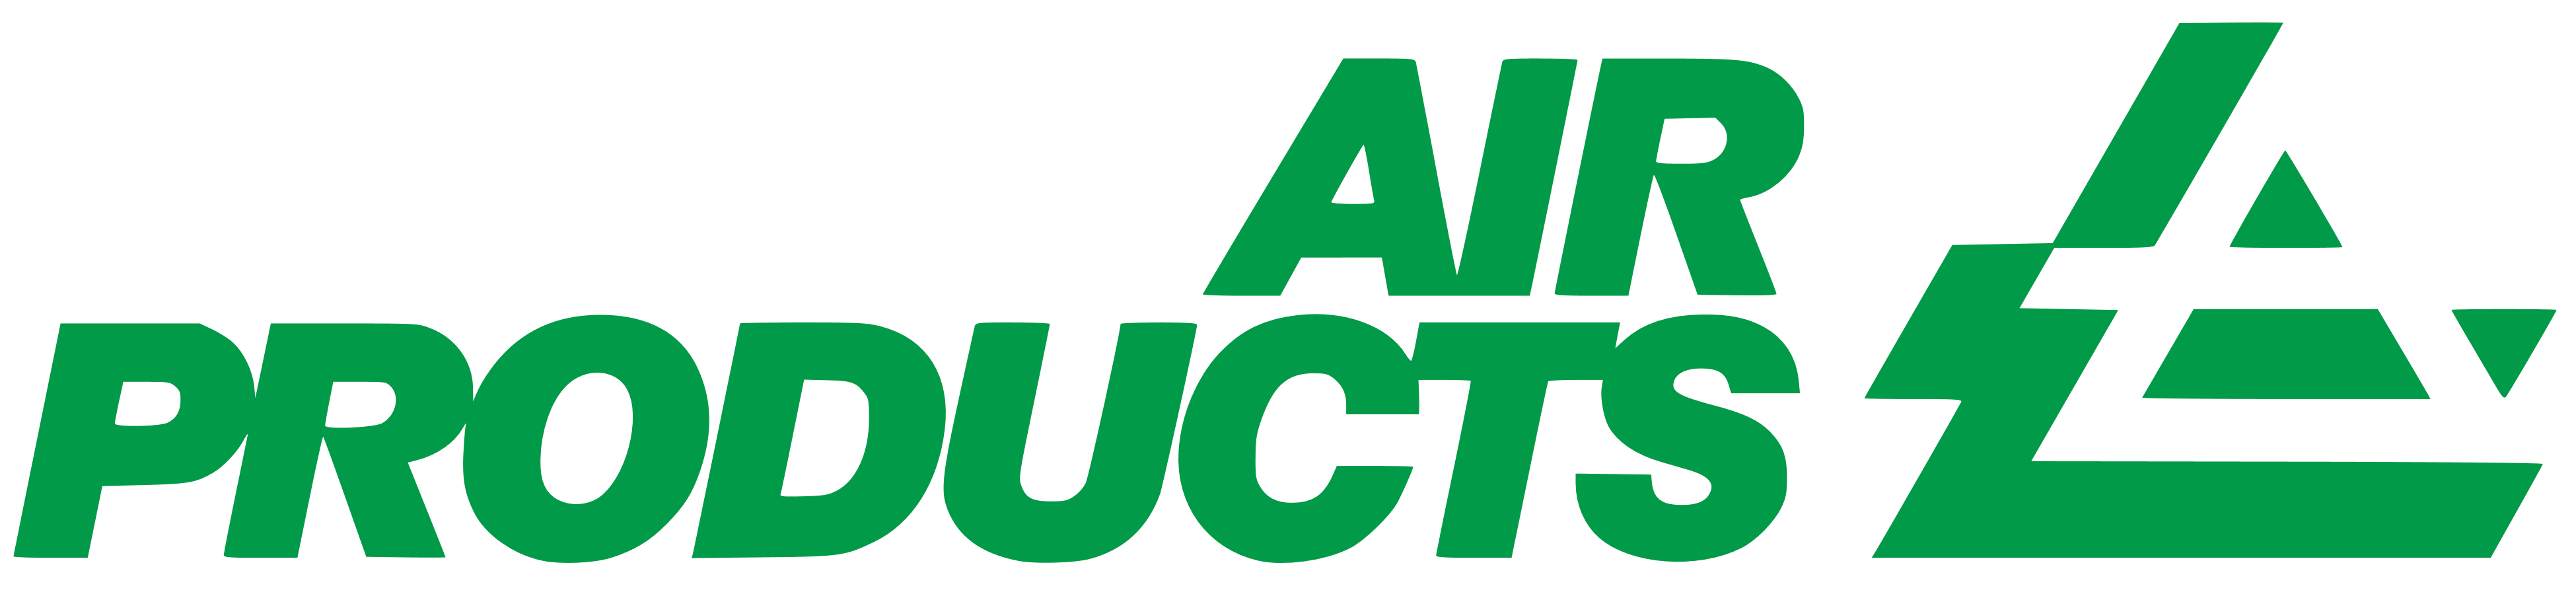 Air_Products_logo